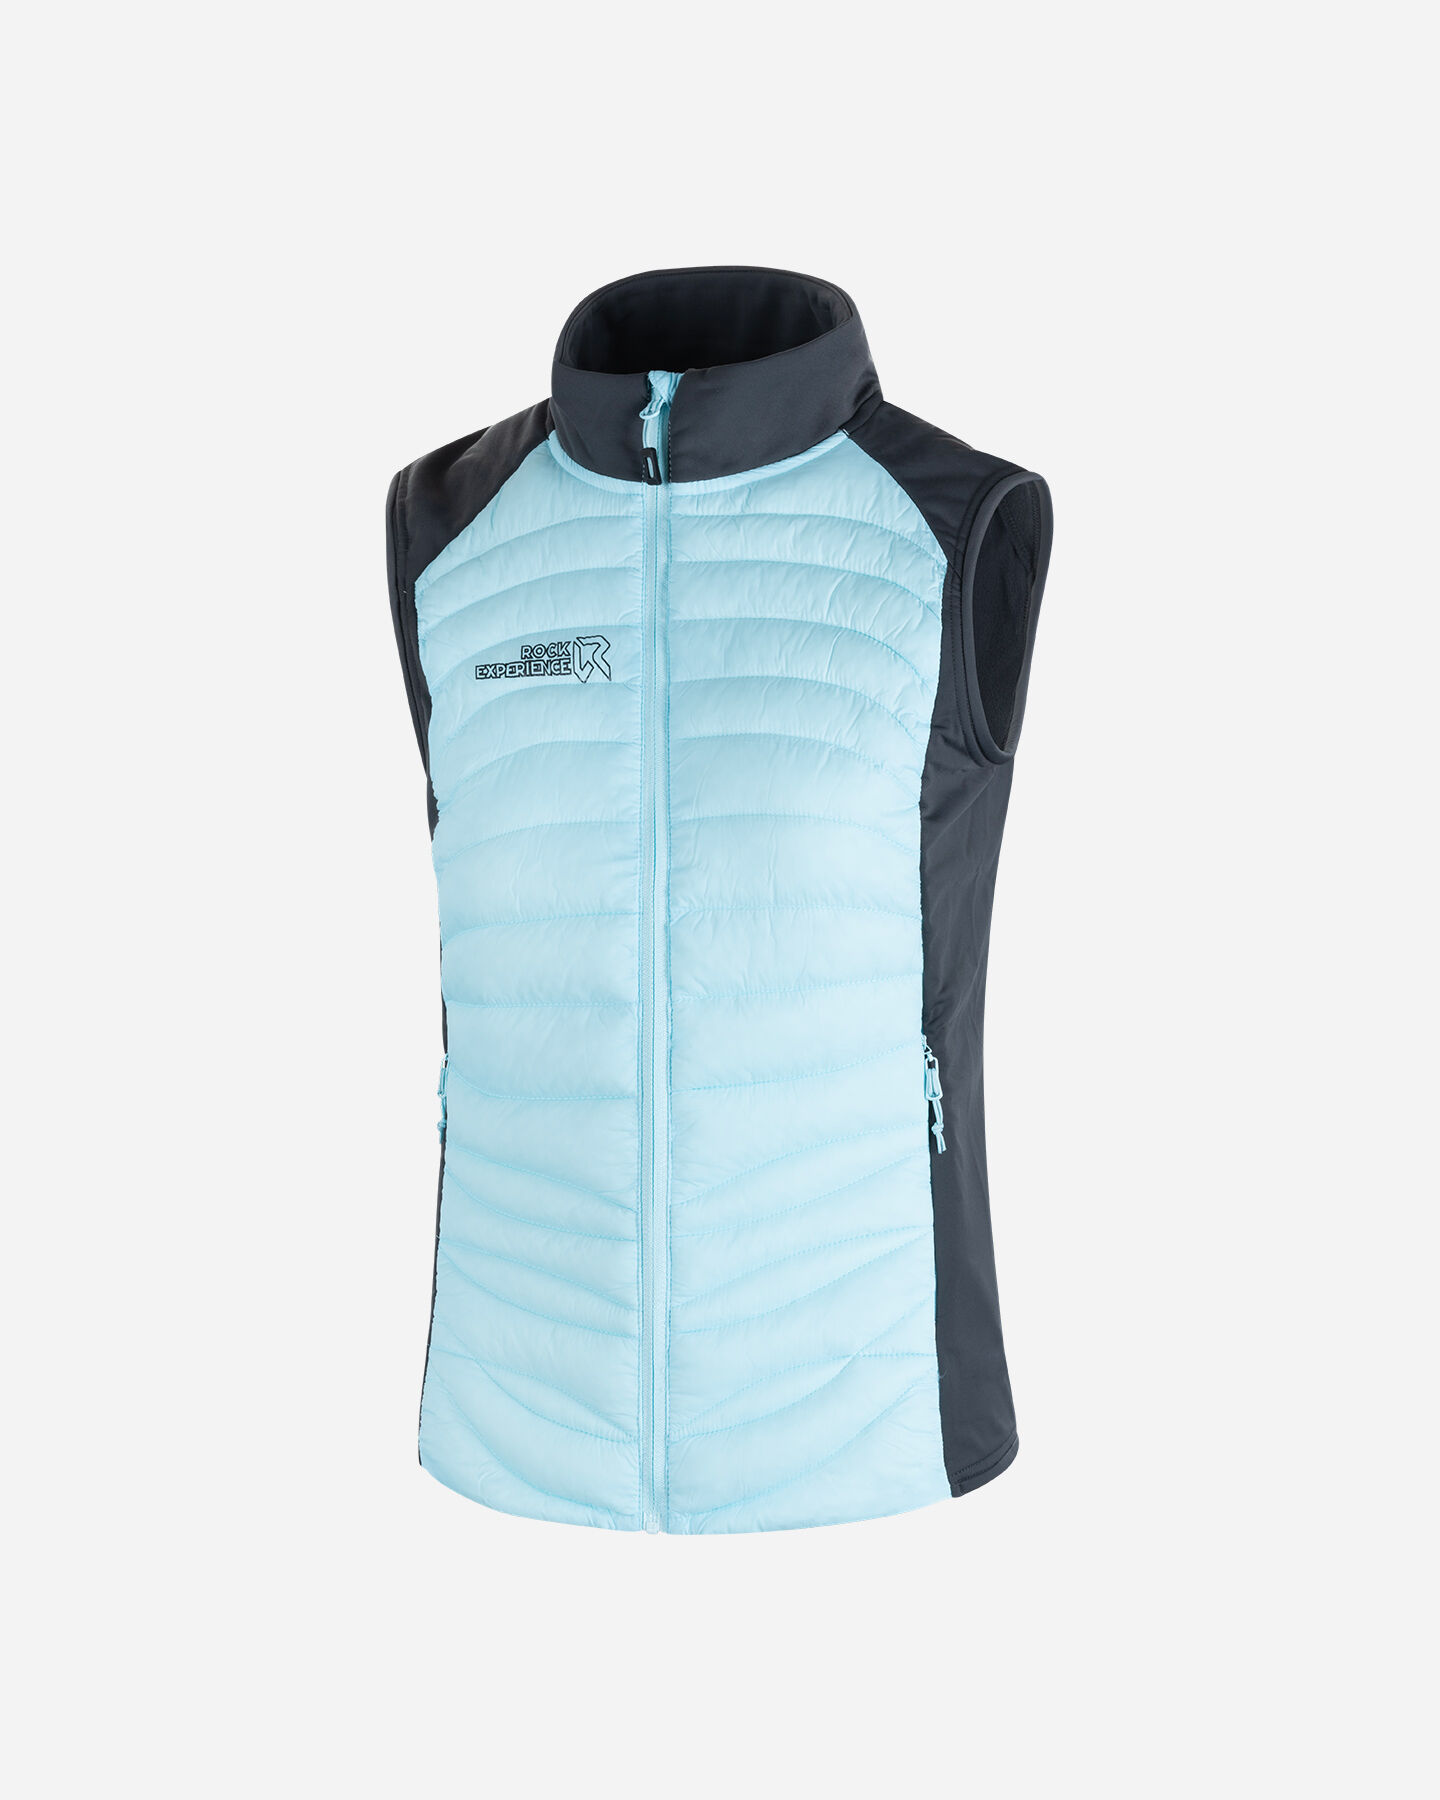  Gilet ROCK EXPERIENCE TEQUILA W S4124032|C942|XS scatto 0